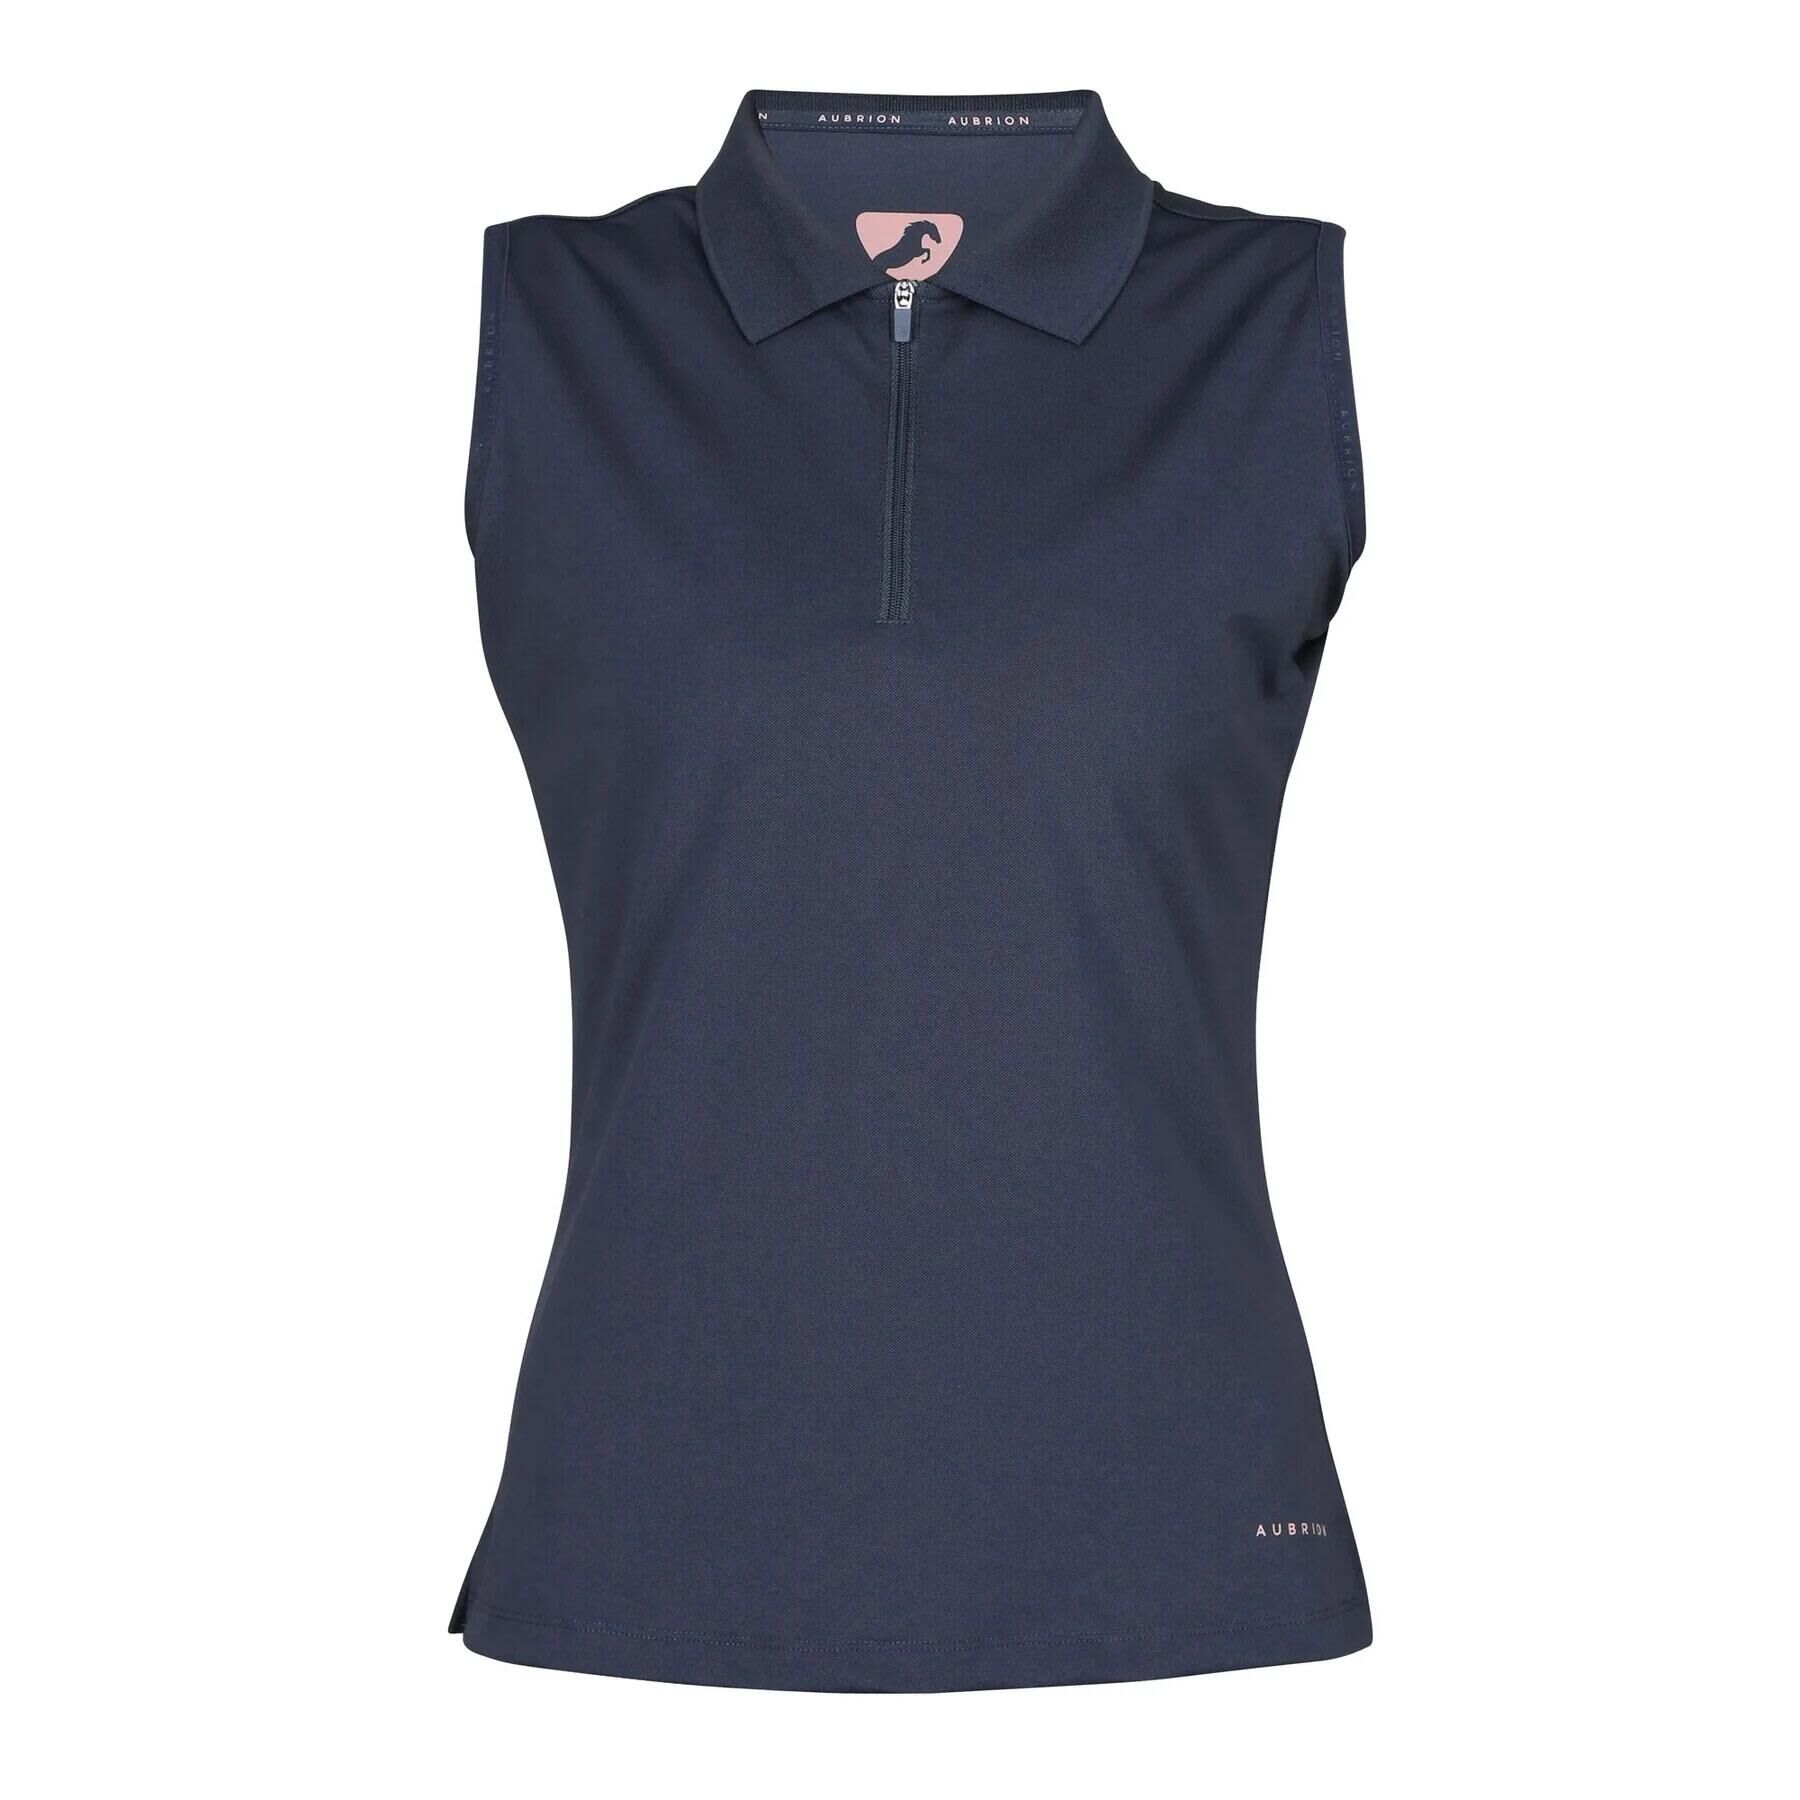 SHIRES Womens/Ladies Sleeveless Technical Top (Navy)